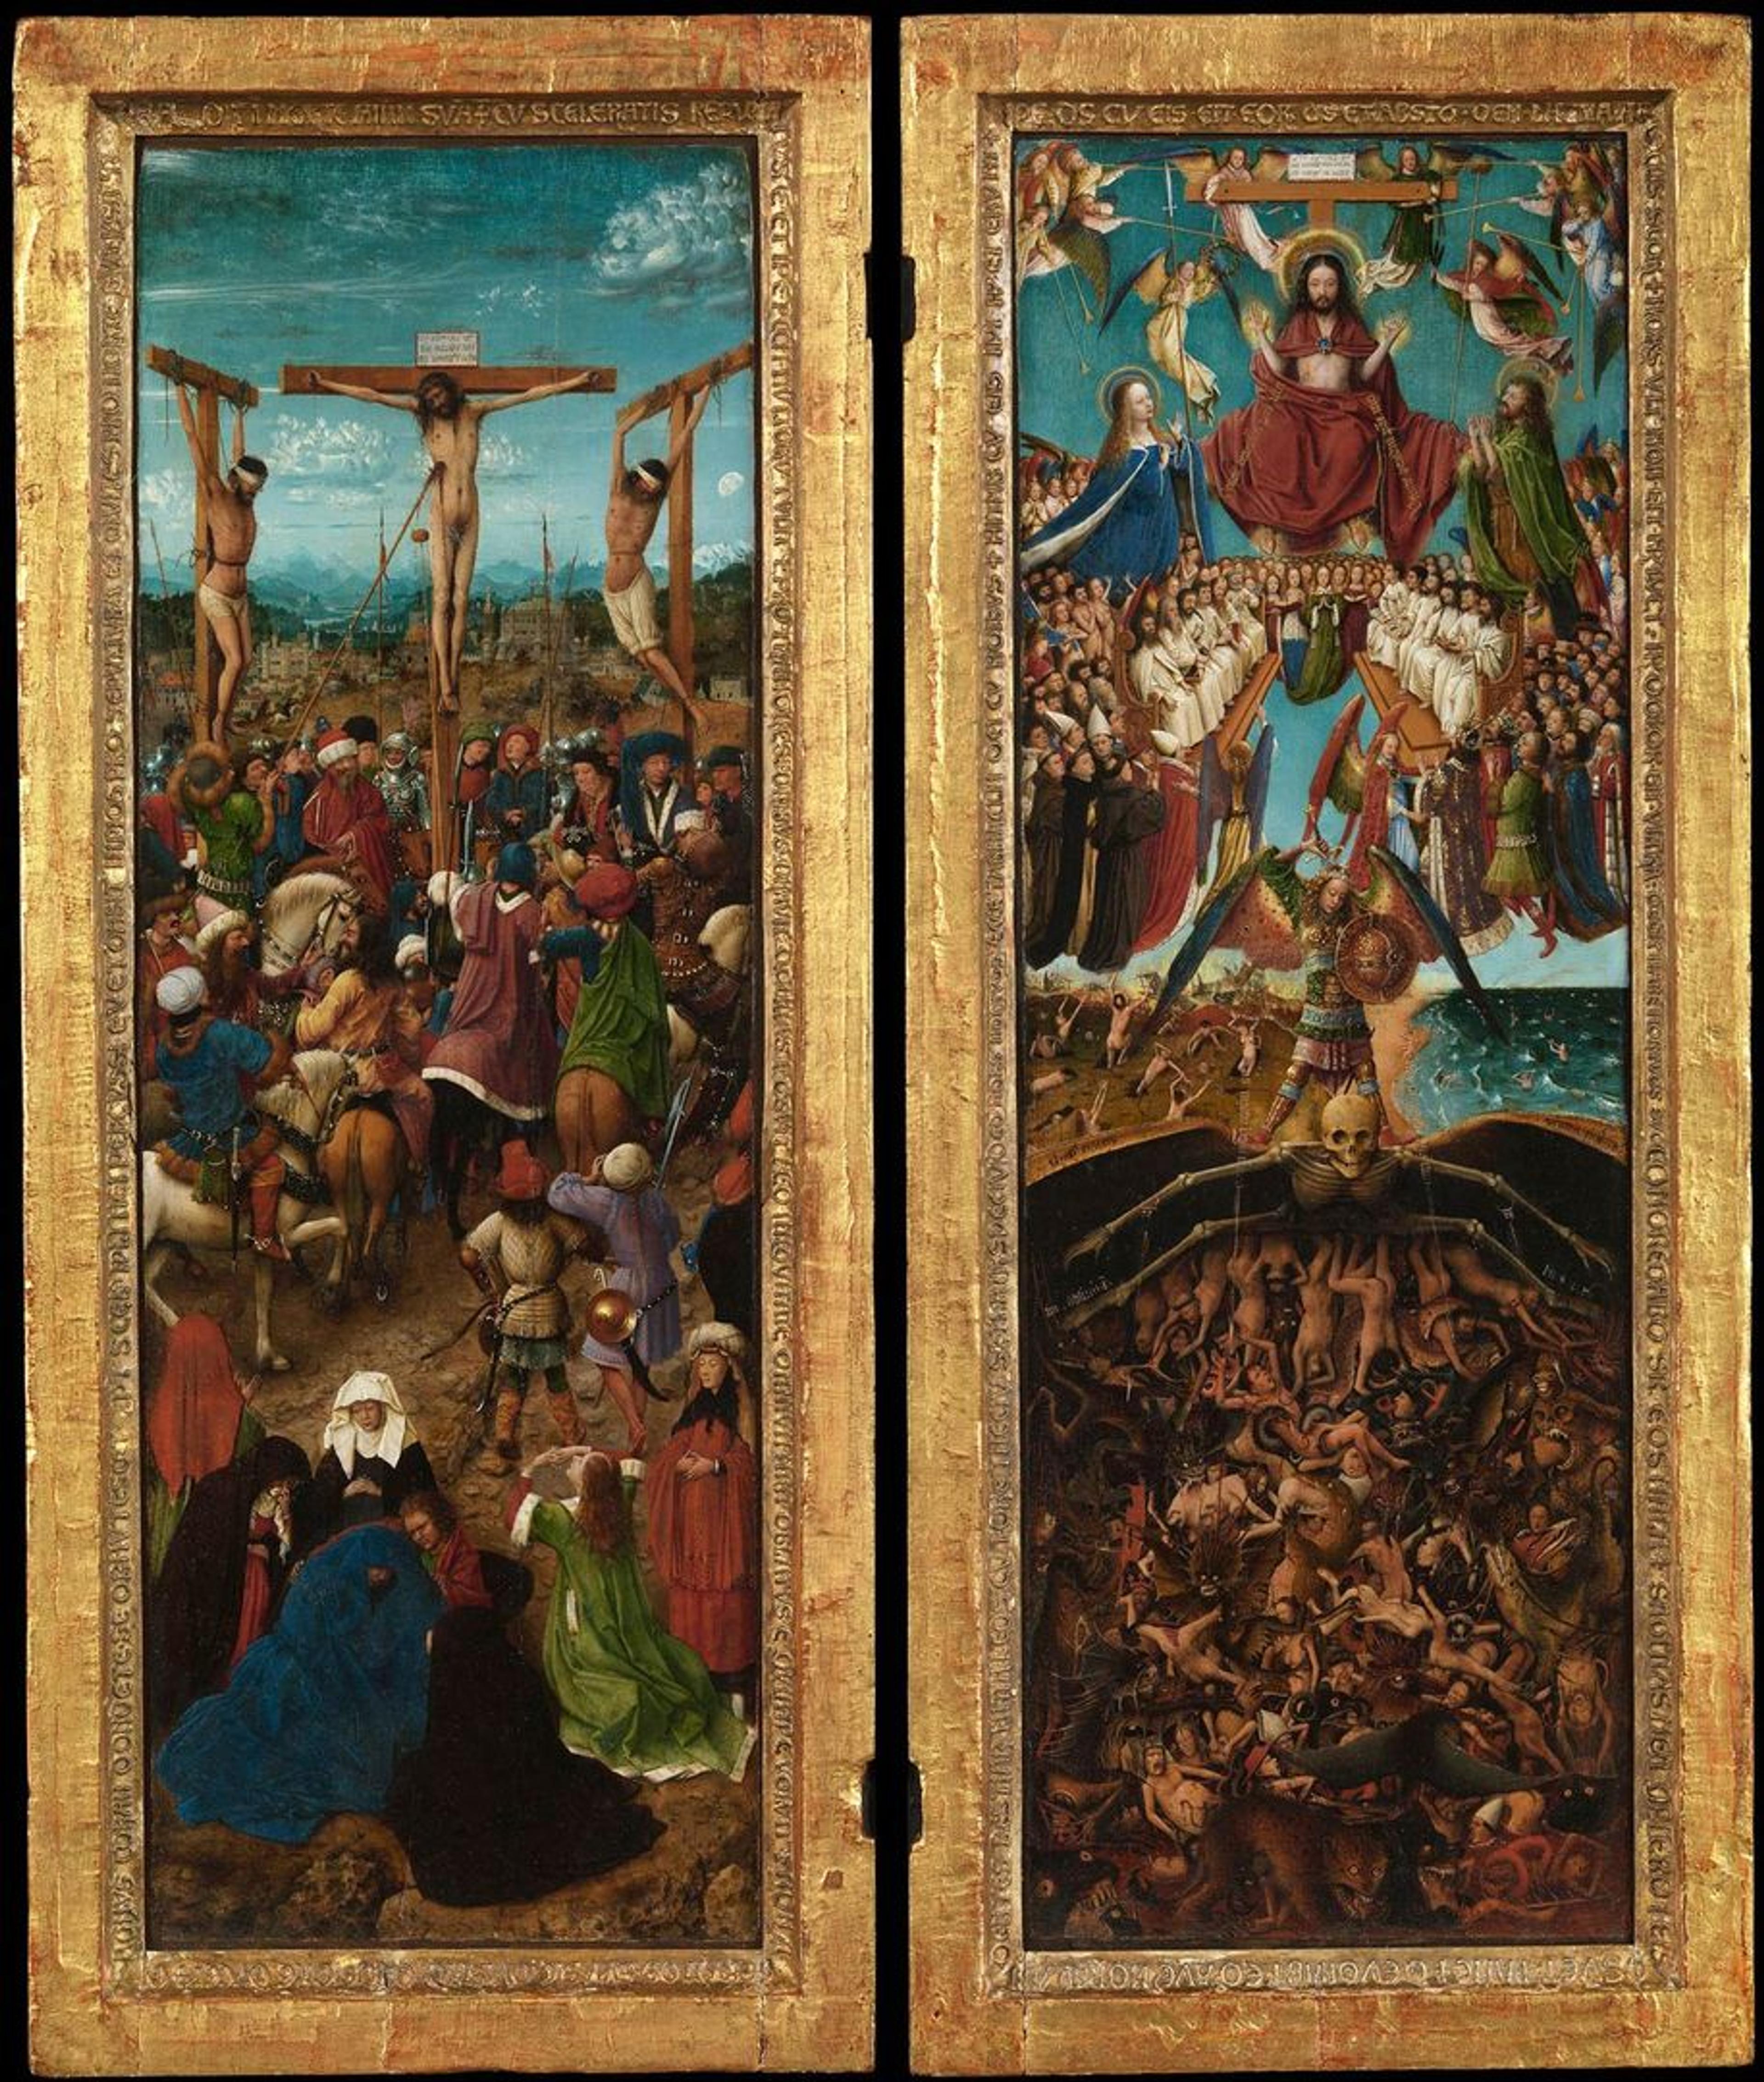 Image of a two-panel painting by Jan Van Eyck depicting the Crucifixion of Christ (left) and the Last Judgment (right)